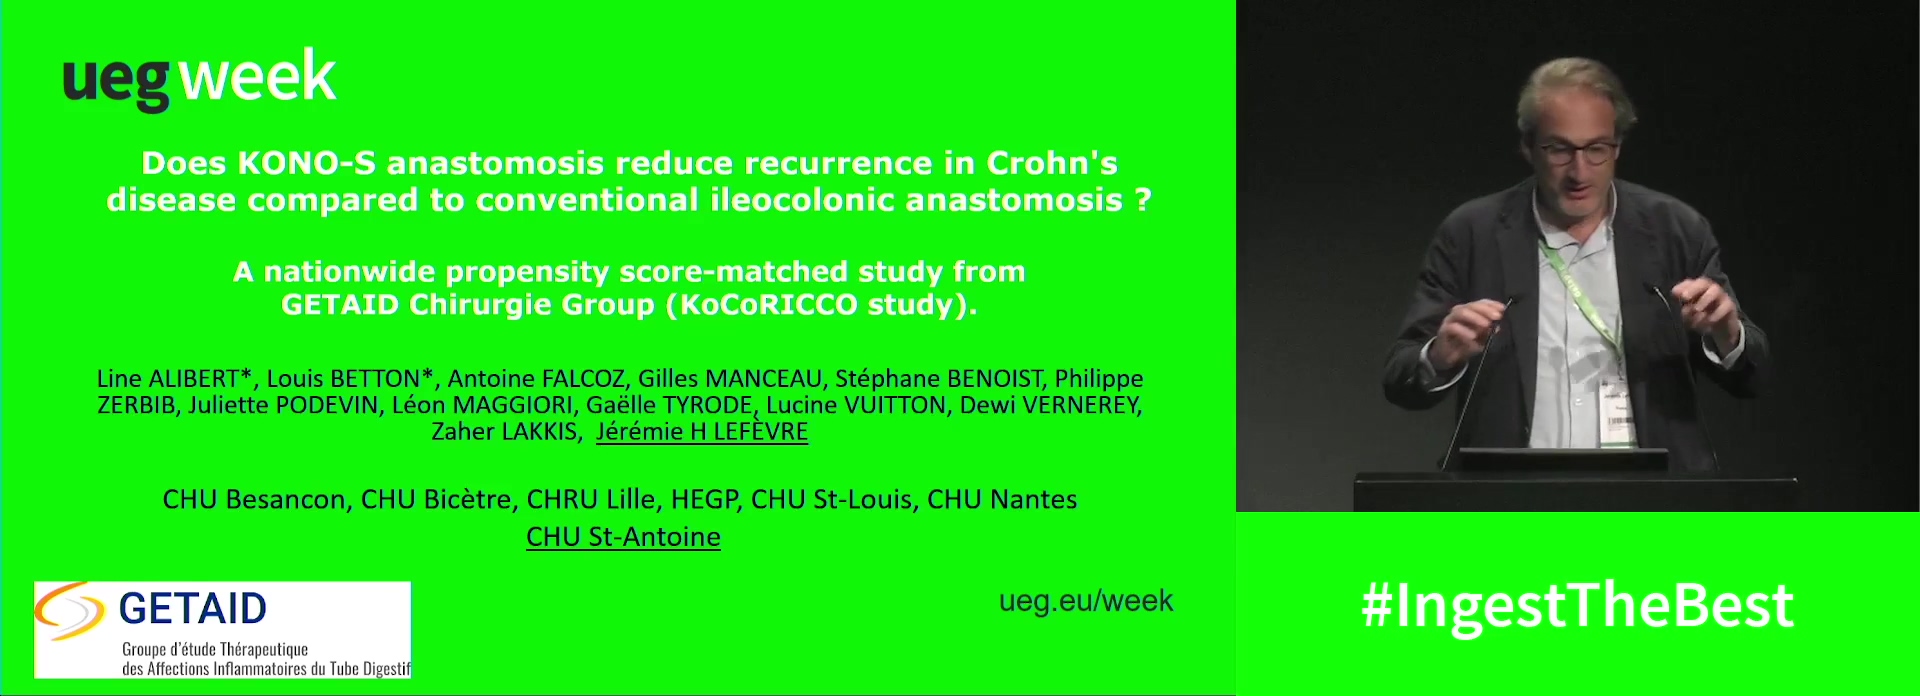 DOES KONO-S ANASTOMOSIS REDUCE RECURRENCE IN CROHN'S DISEASE COMPARED TO CONVENTIONAL ILEOCOLONIC ANASTOMOSIS? A NATIONWIDE PROPENSITY SCORE-MATCHED STUDY FROM GETAID CHIRURGIE GROUP